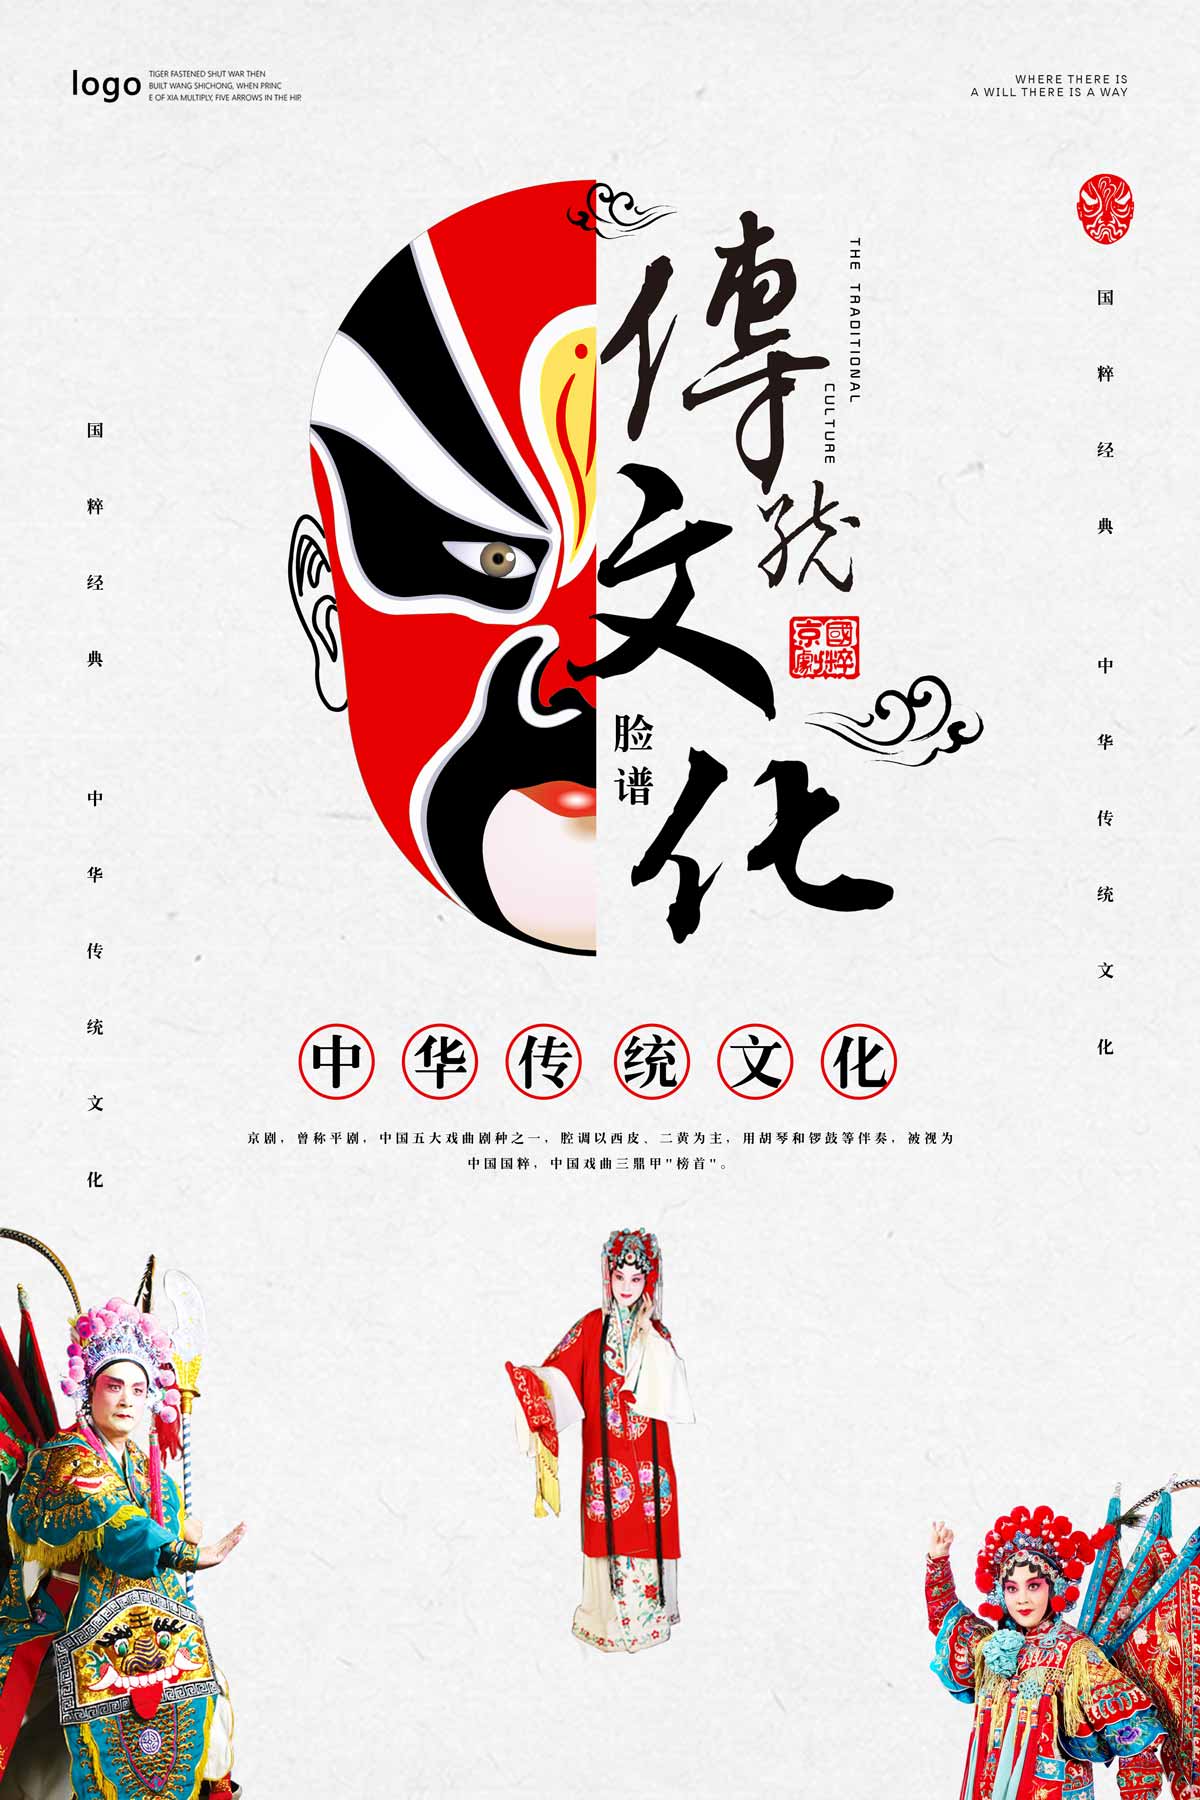 Chinese wind Beijing opera poster - China PSD File Free Download